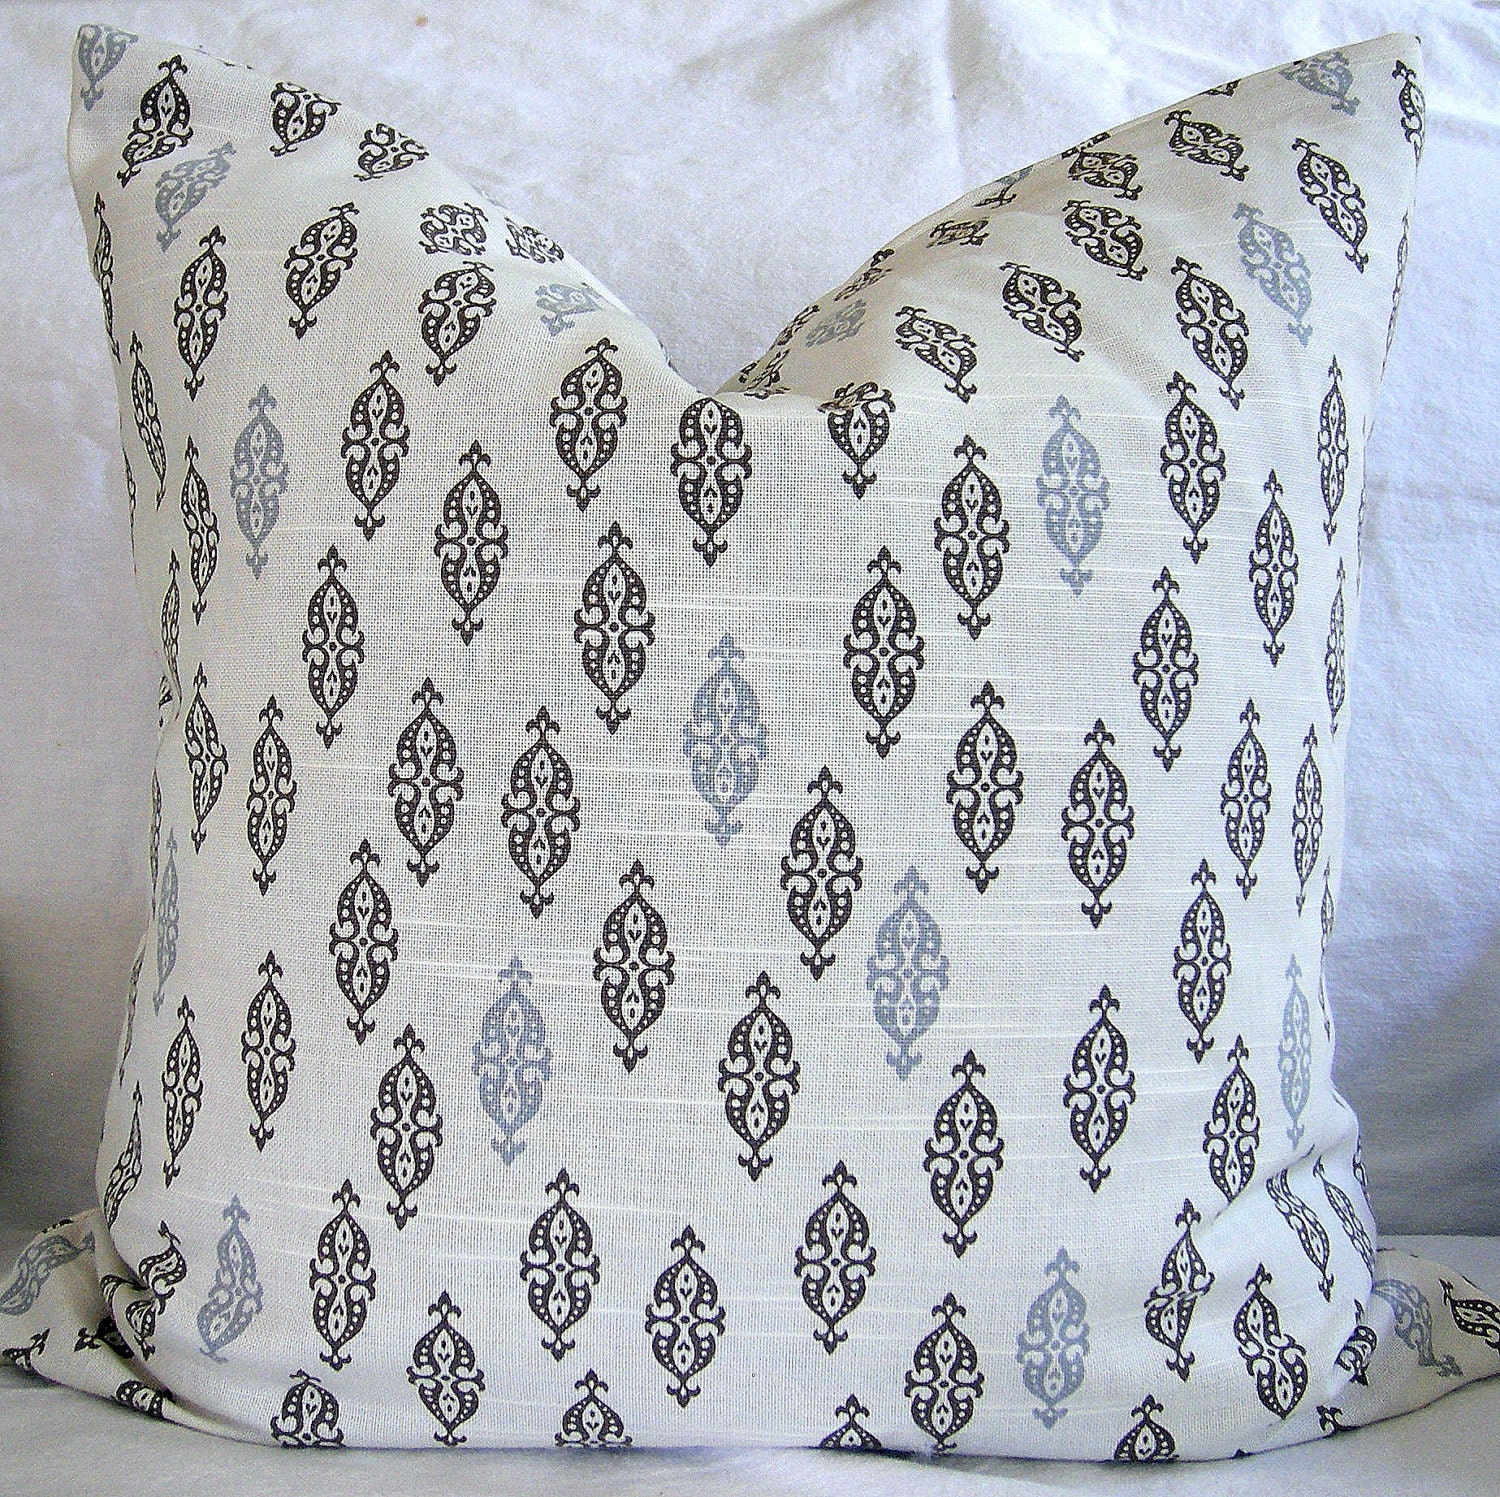 2 pillows 24x15 in. Decorative Pillow Cover Dwell Studio Boteh Camel,  MADE TO ORDER, Tan, Gray